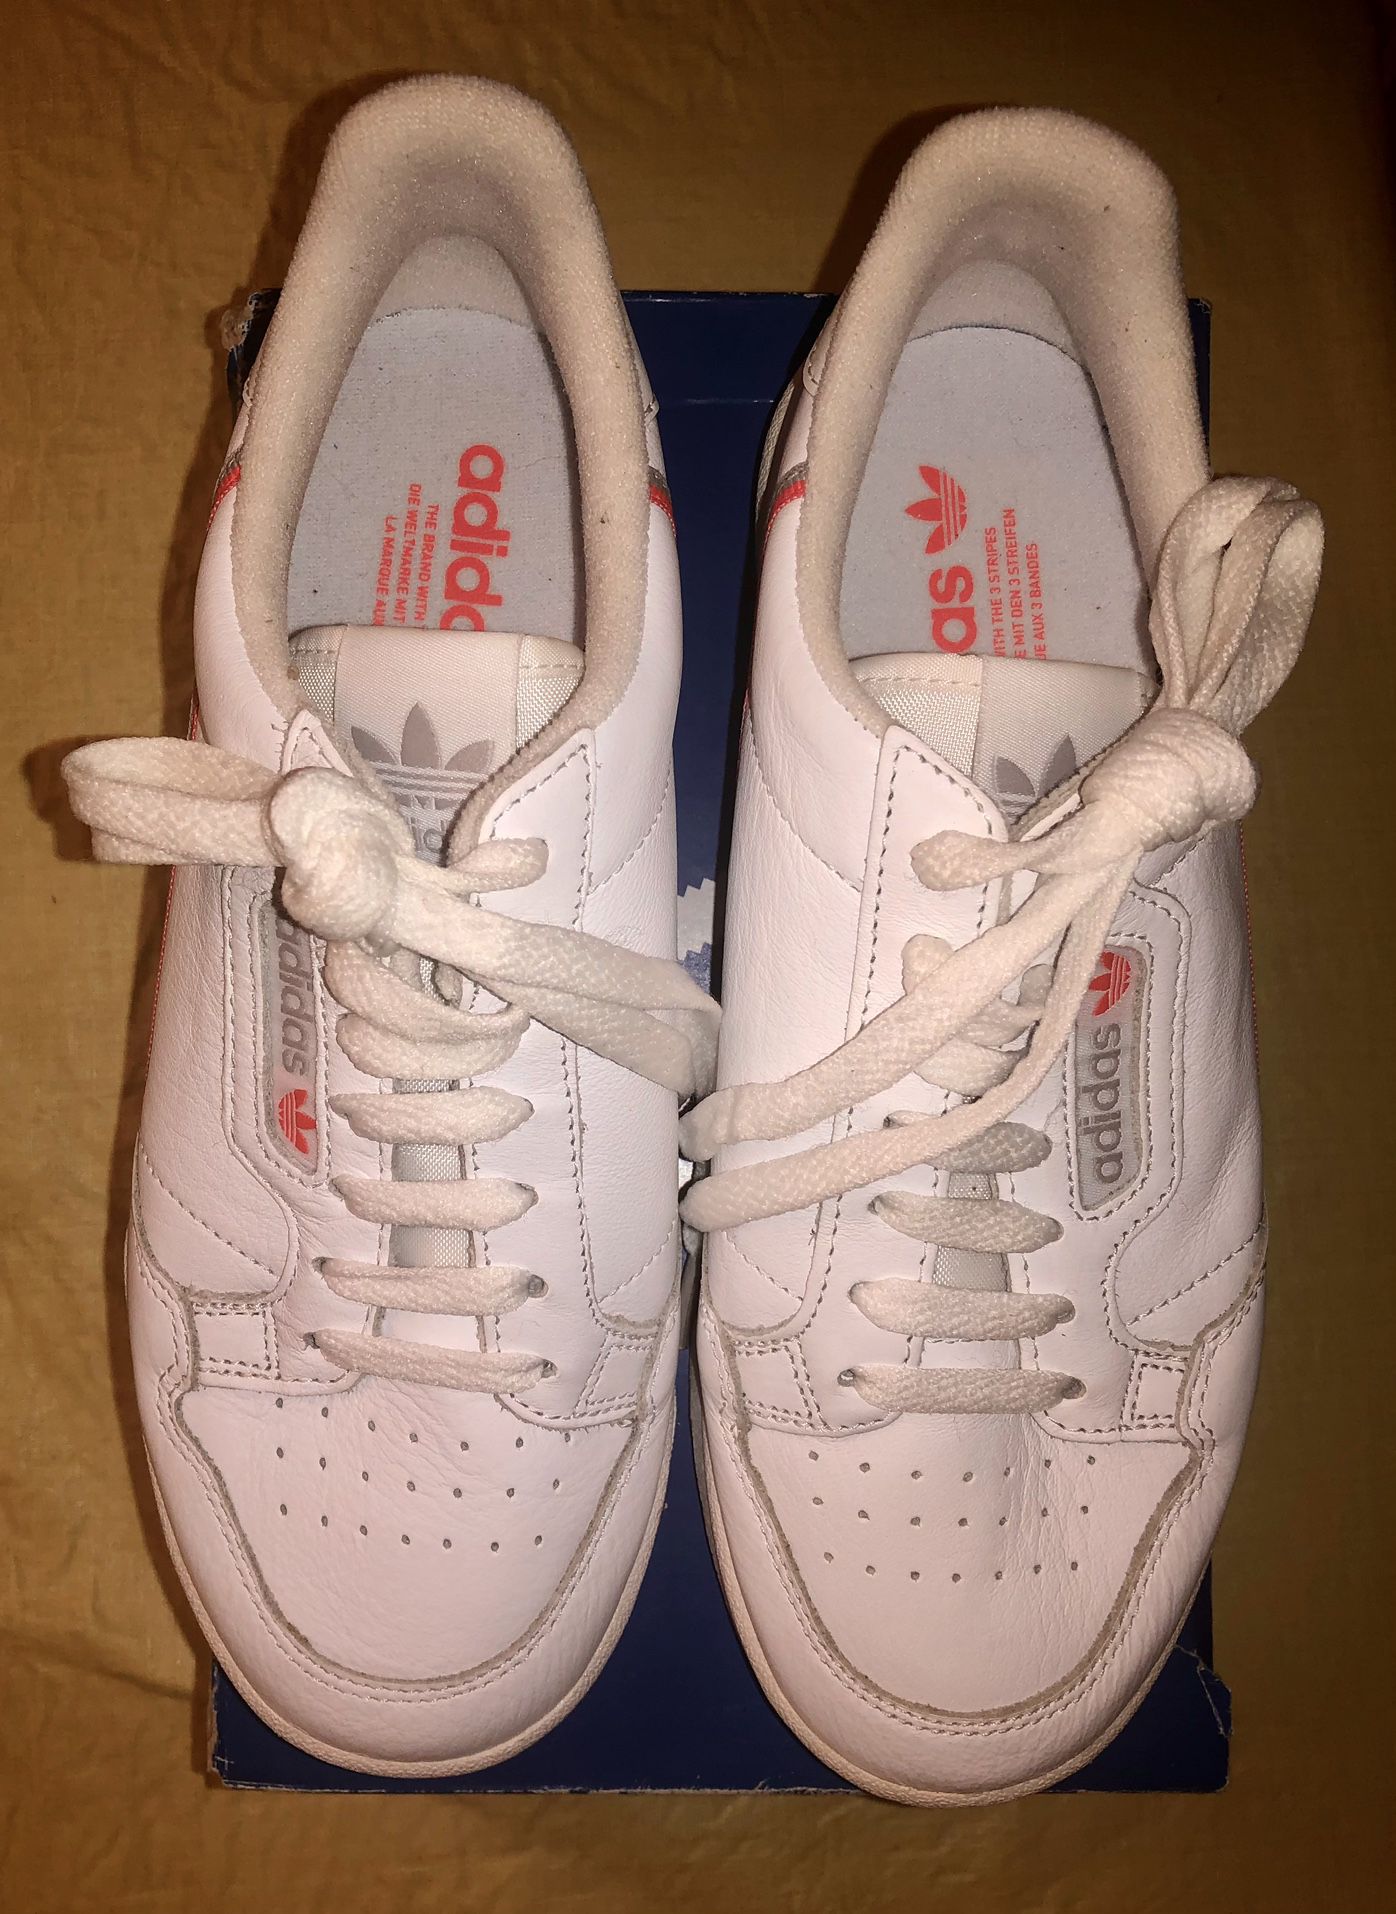 bisonte Sospechar la carretera Adidas ORIGINALS Continental 80 Lace Up Sneakers- White (Women 6 1/2) for  Sale in The Bronx, NY - OfferUp